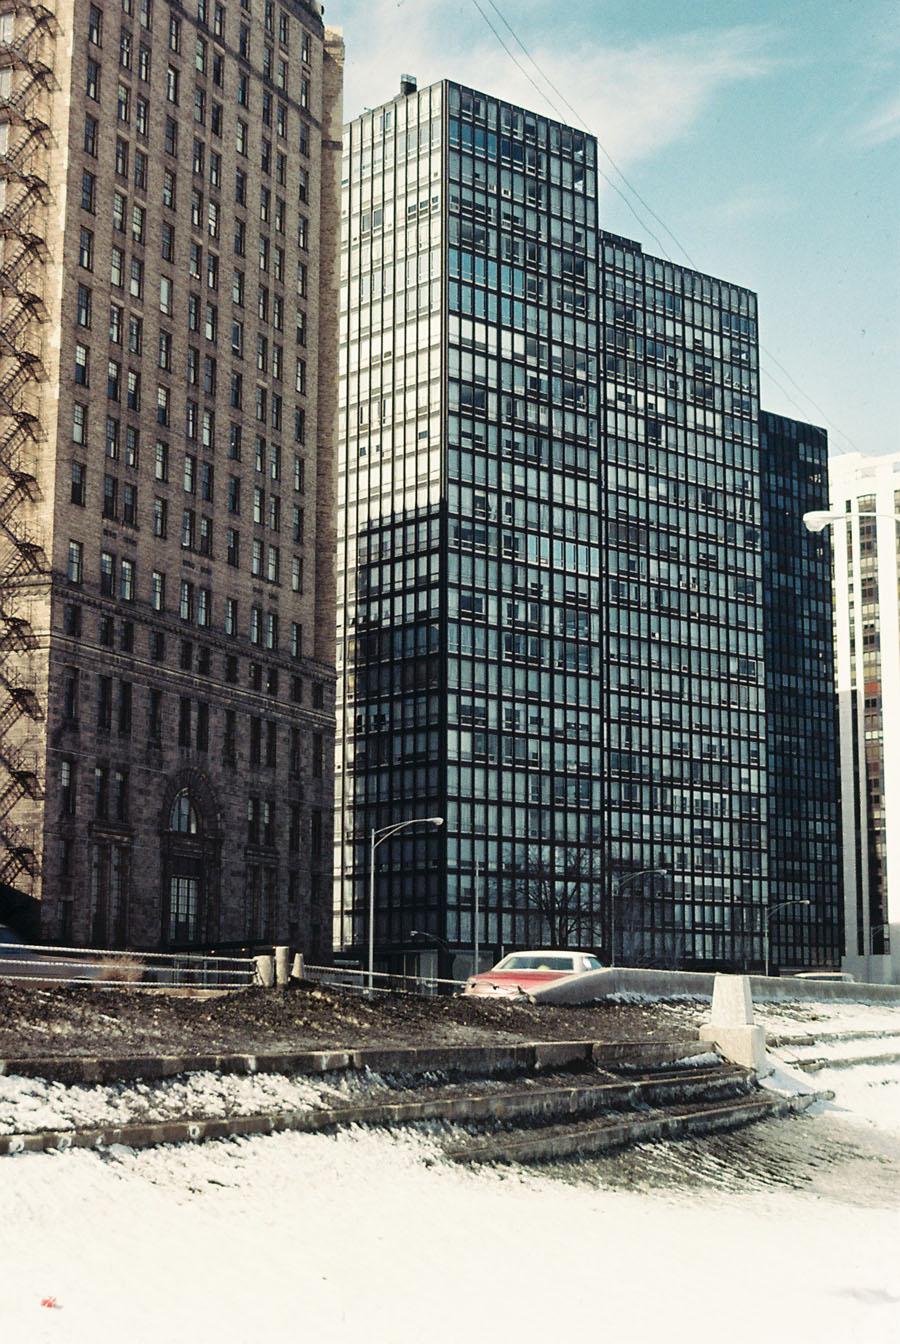 860 & 880 Lake Shore Drive Apartments, Chicago By Mies van der Rohe, 1951